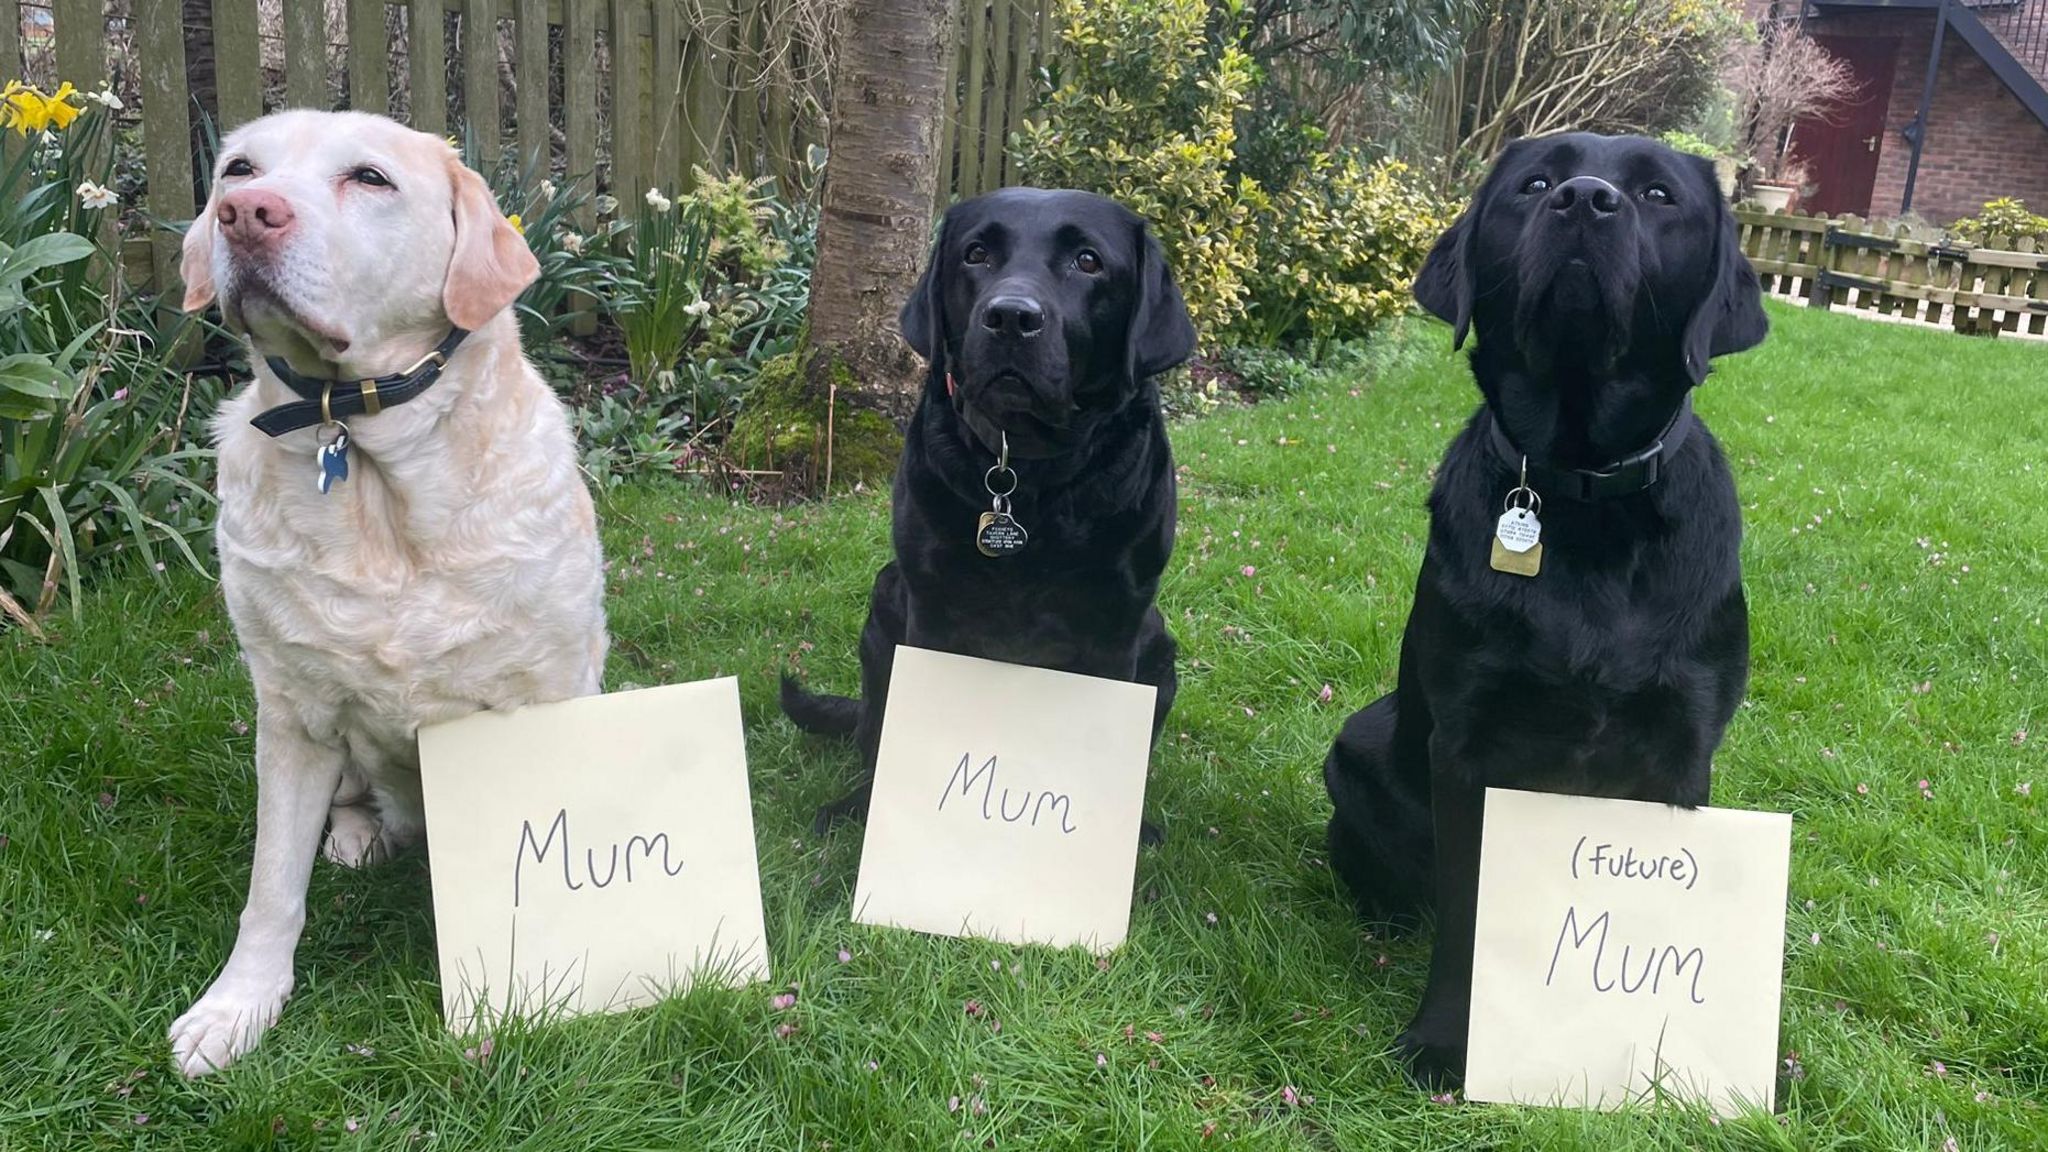 Labradors Connie, Sophie and Coco with two signs saying 'Mum' and one sign saying '(Future) Mum'